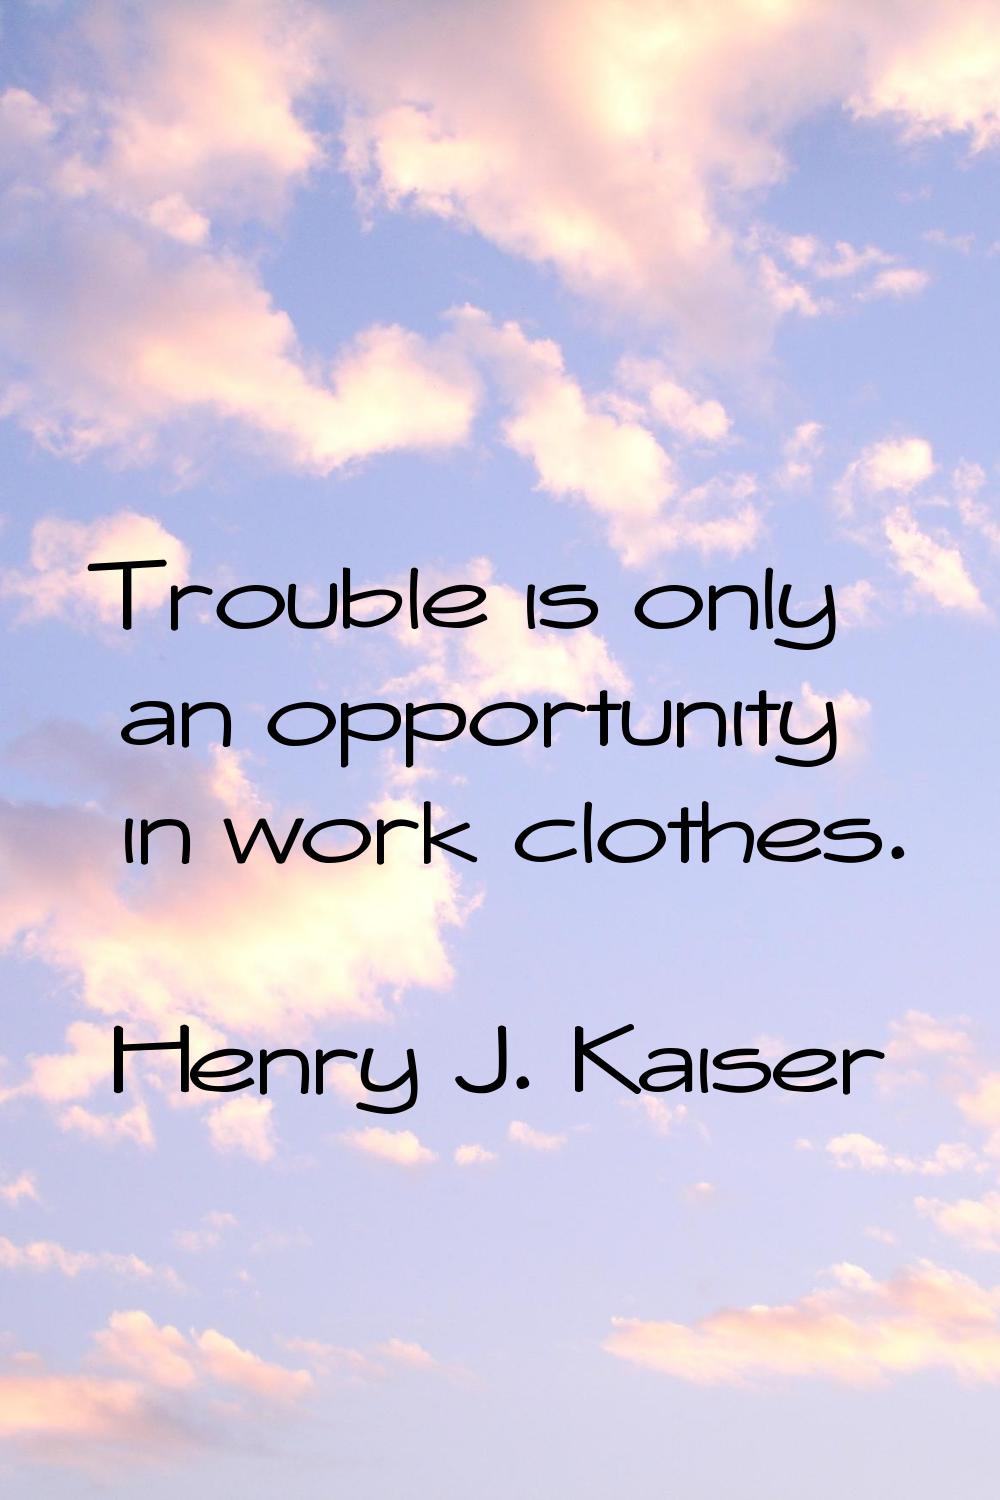 Trouble is only an opportunity in work clothes.